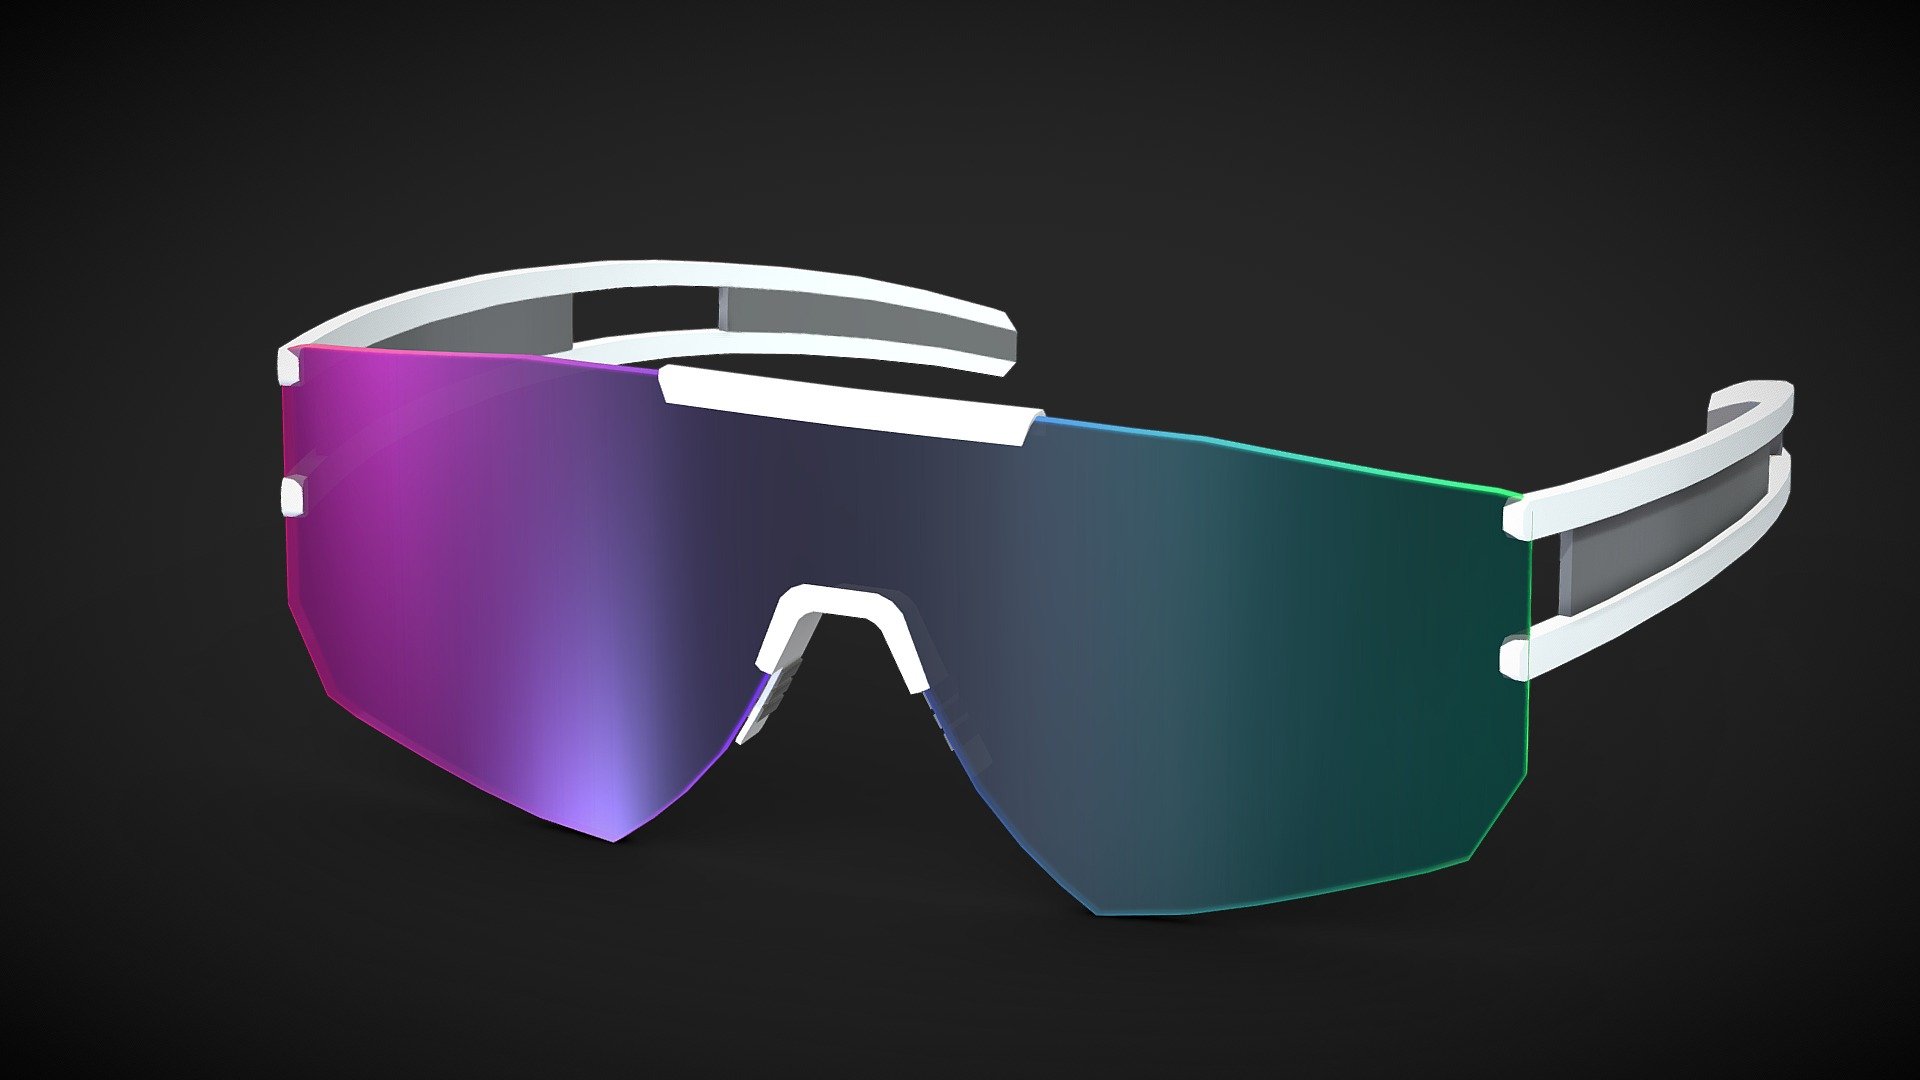 Oakley Radar / Full Rim Sunglasses - low poly

Triangles: 1.5k
Vertices: 766

4096x4096 PNG texture

👓  my glasses collection &lt;&lt; - Oakley Radar / Full Rim Sunglasses - low poly - Buy Royalty Free 3D model by Karolina Renkiewicz (@KarolinaRenkiewicz) 3d model